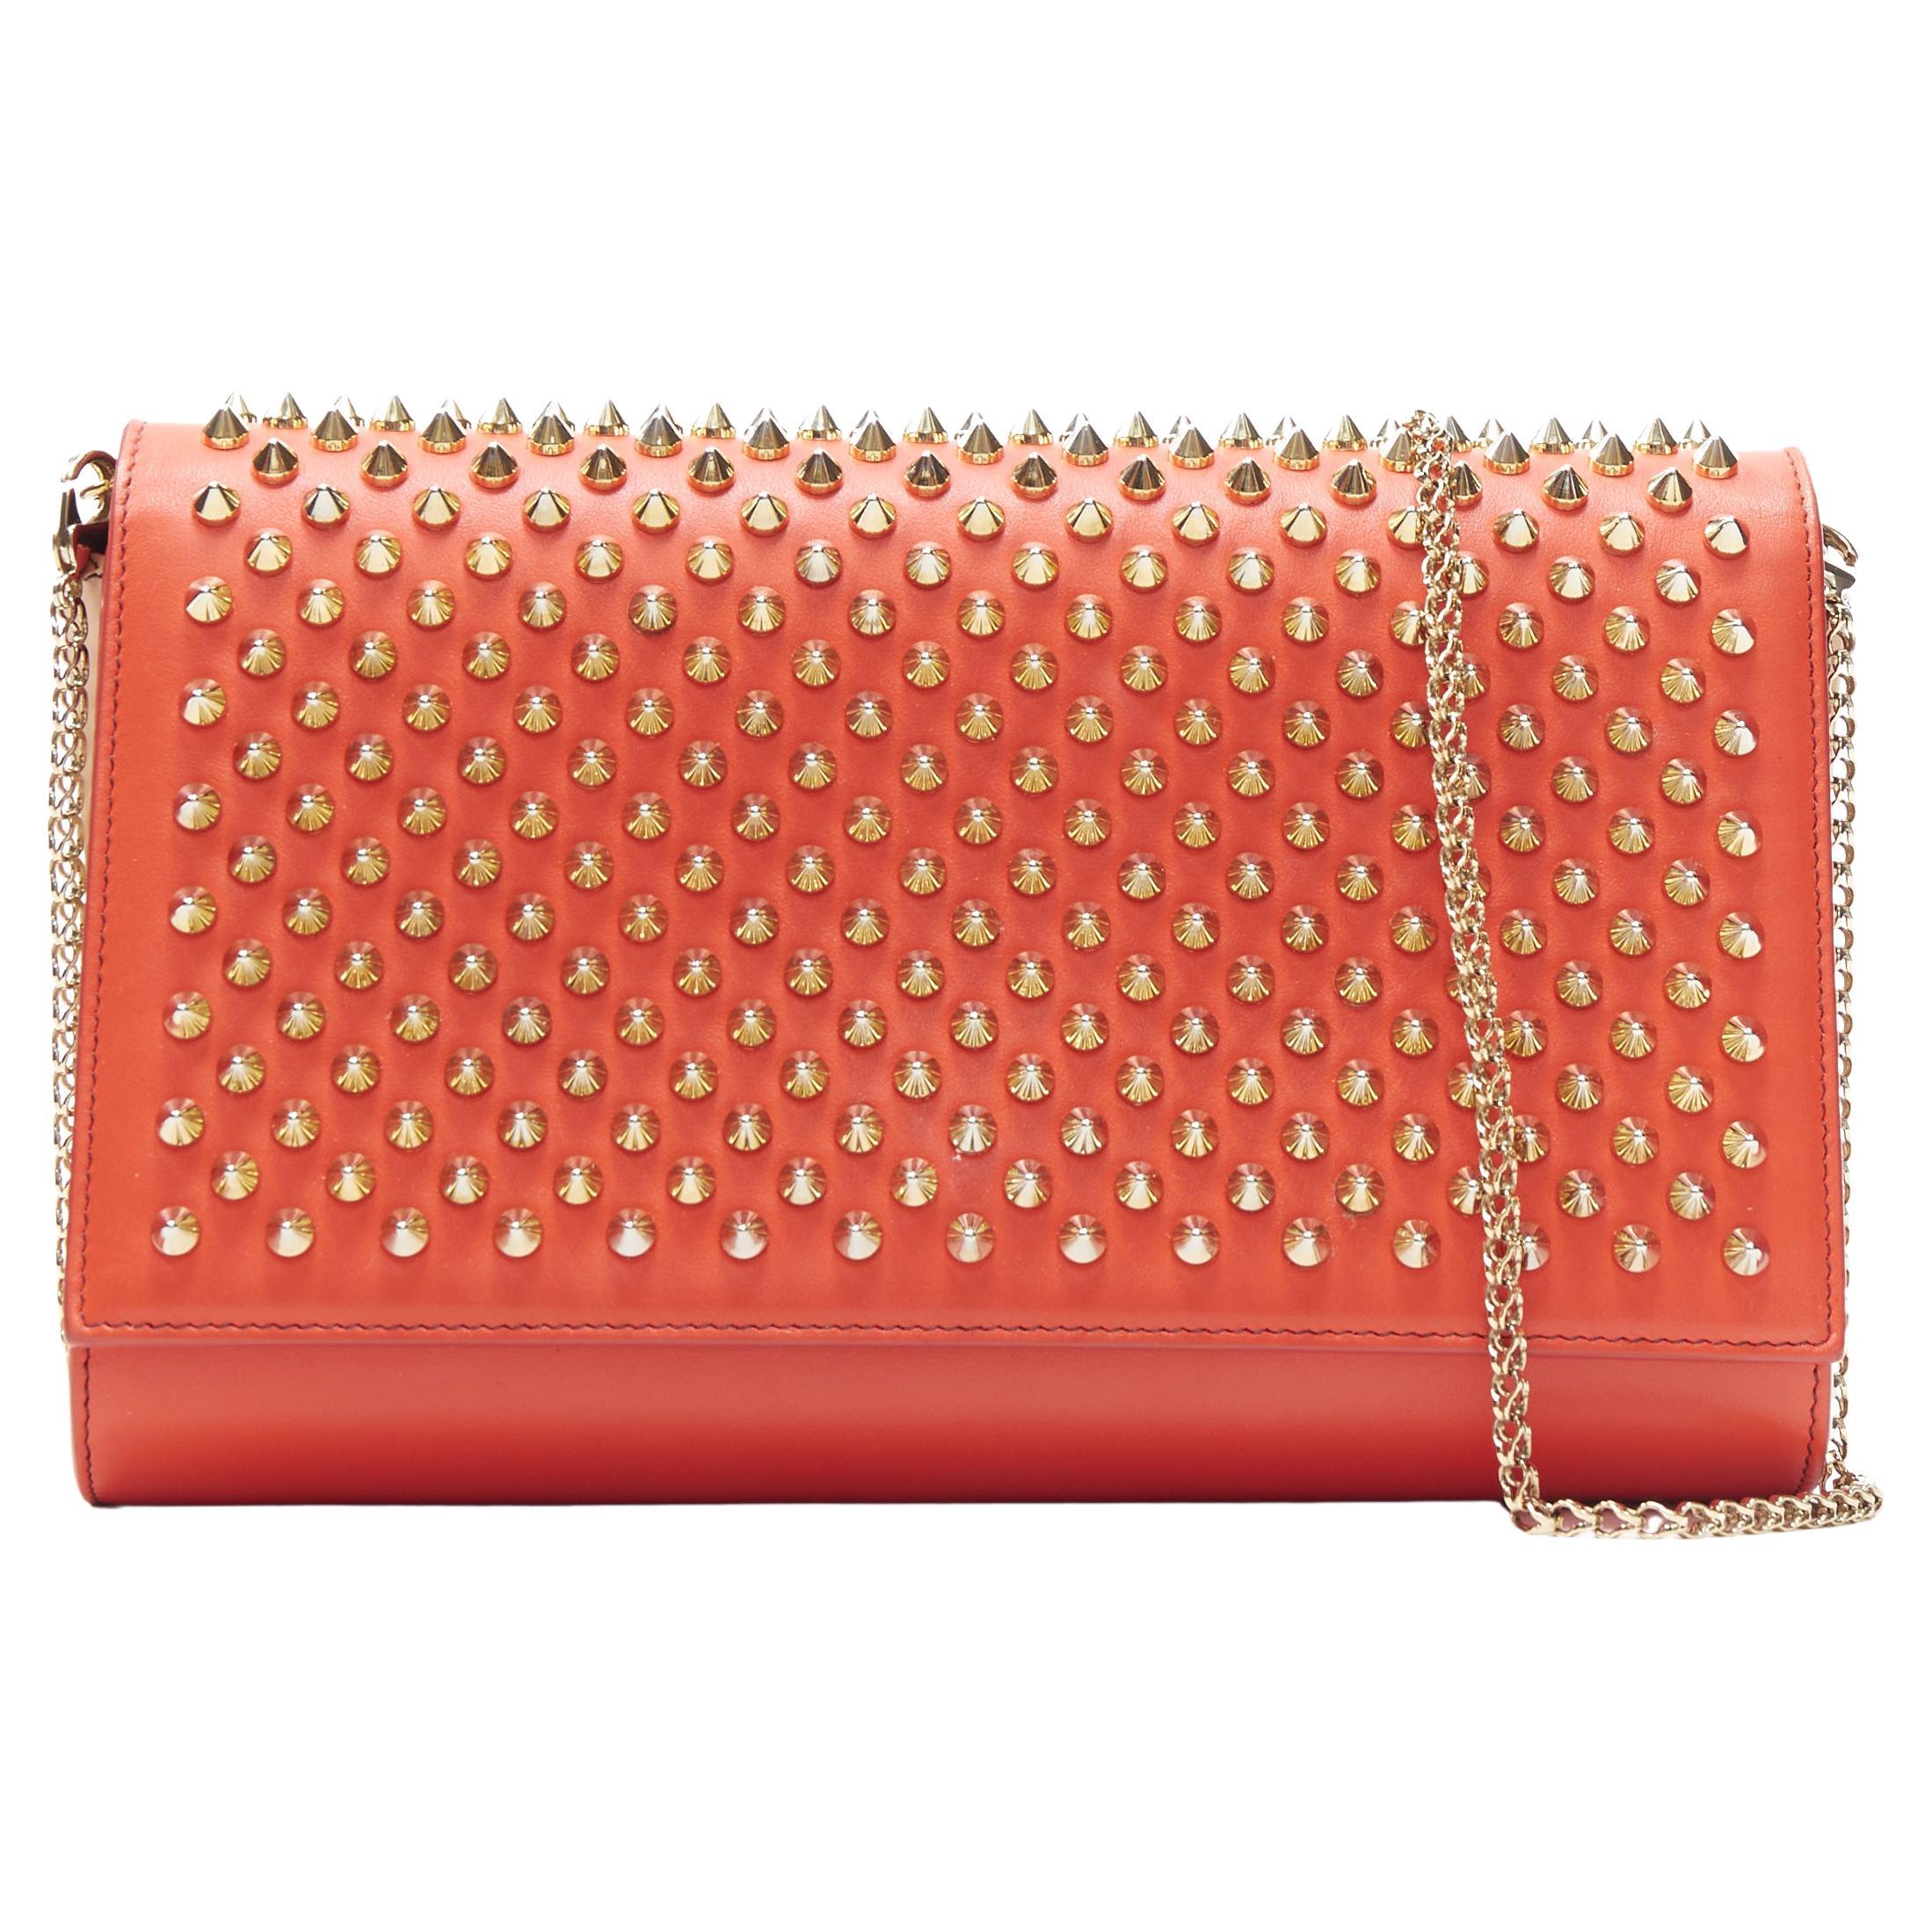 CHRISTIAN LOUBOUTIN Paloma red gold spike stud pink gusset shoulder chain bag For Sale